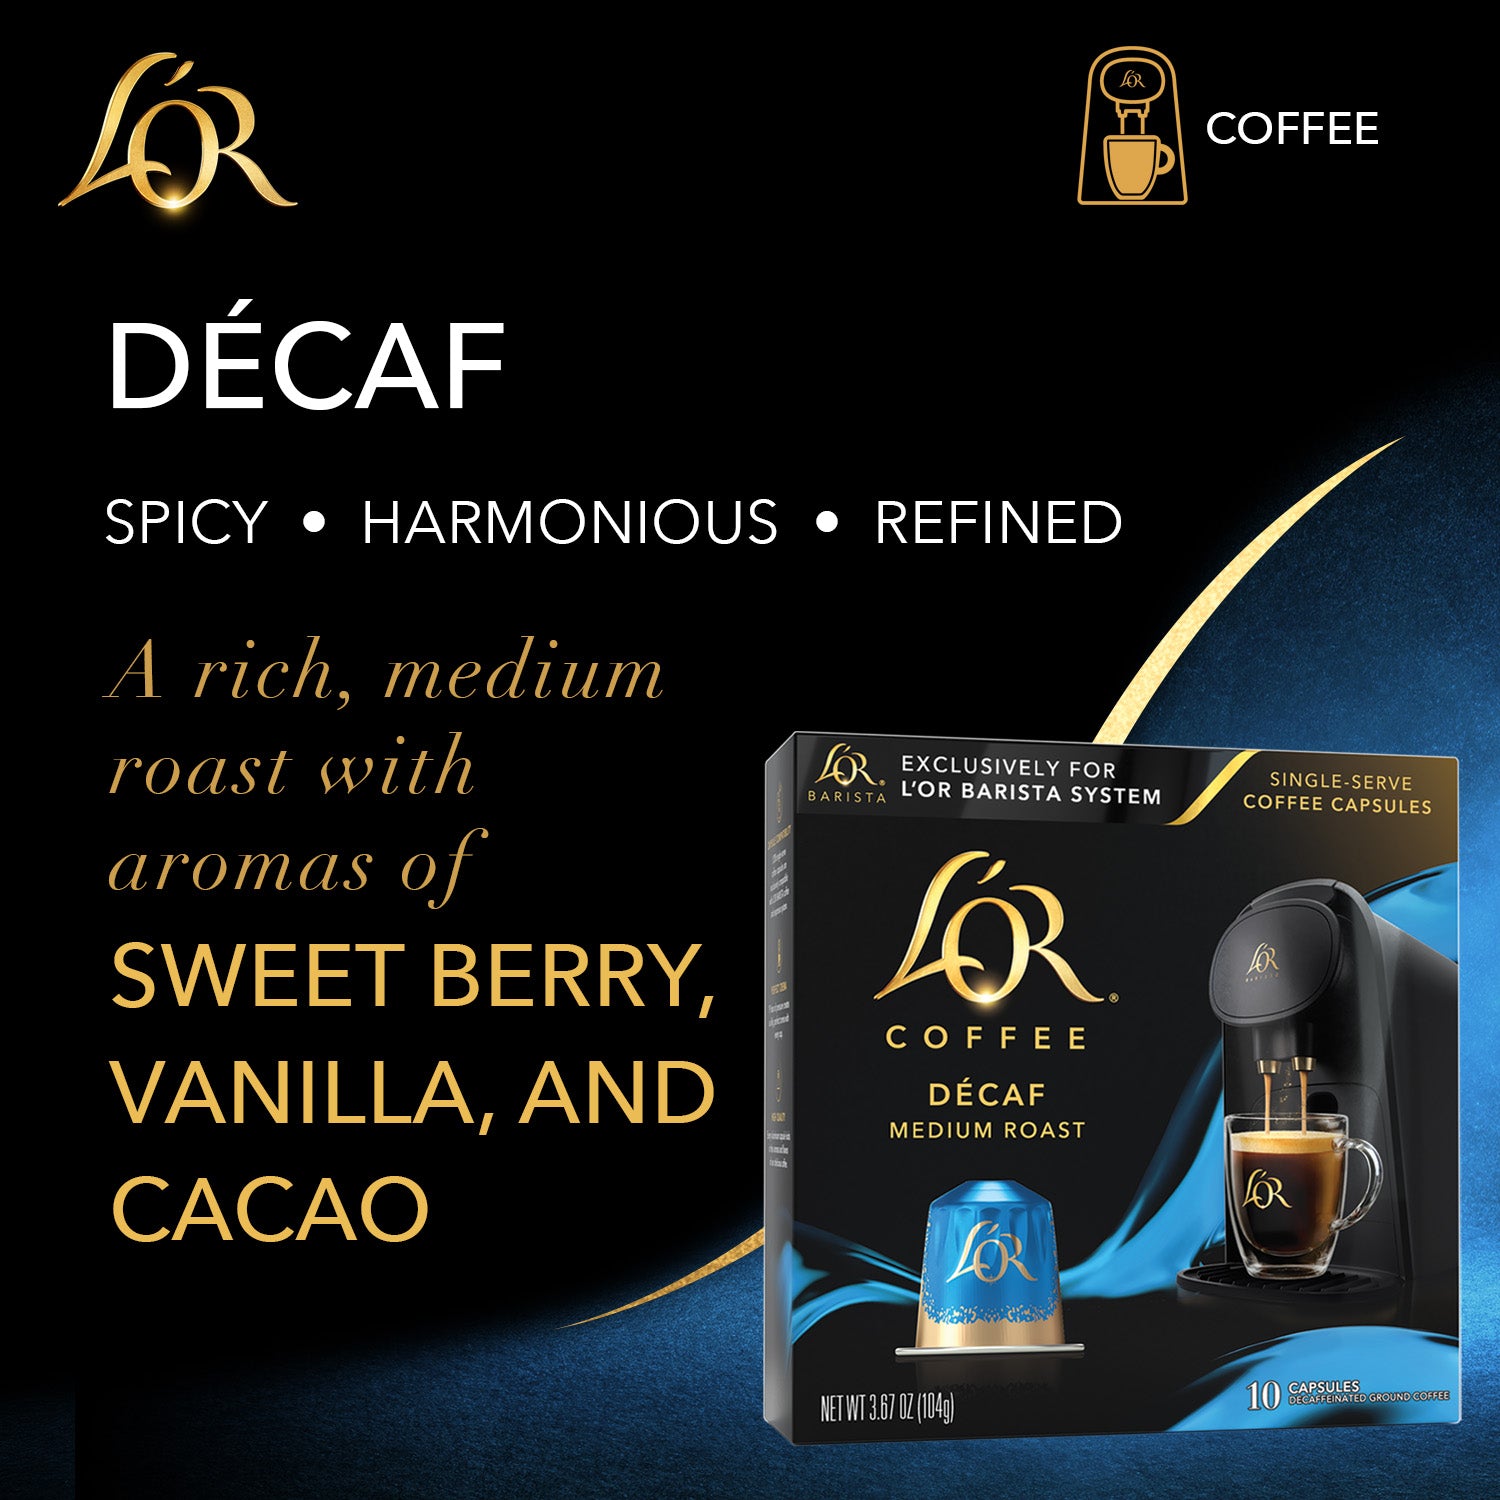 L'or Coffee Pods - Decaf Coffee - Medium Roast - 10 Capsules ($0.99 Each) - Single Serve Coffee Capsules - Compatible with The L'or Barista System